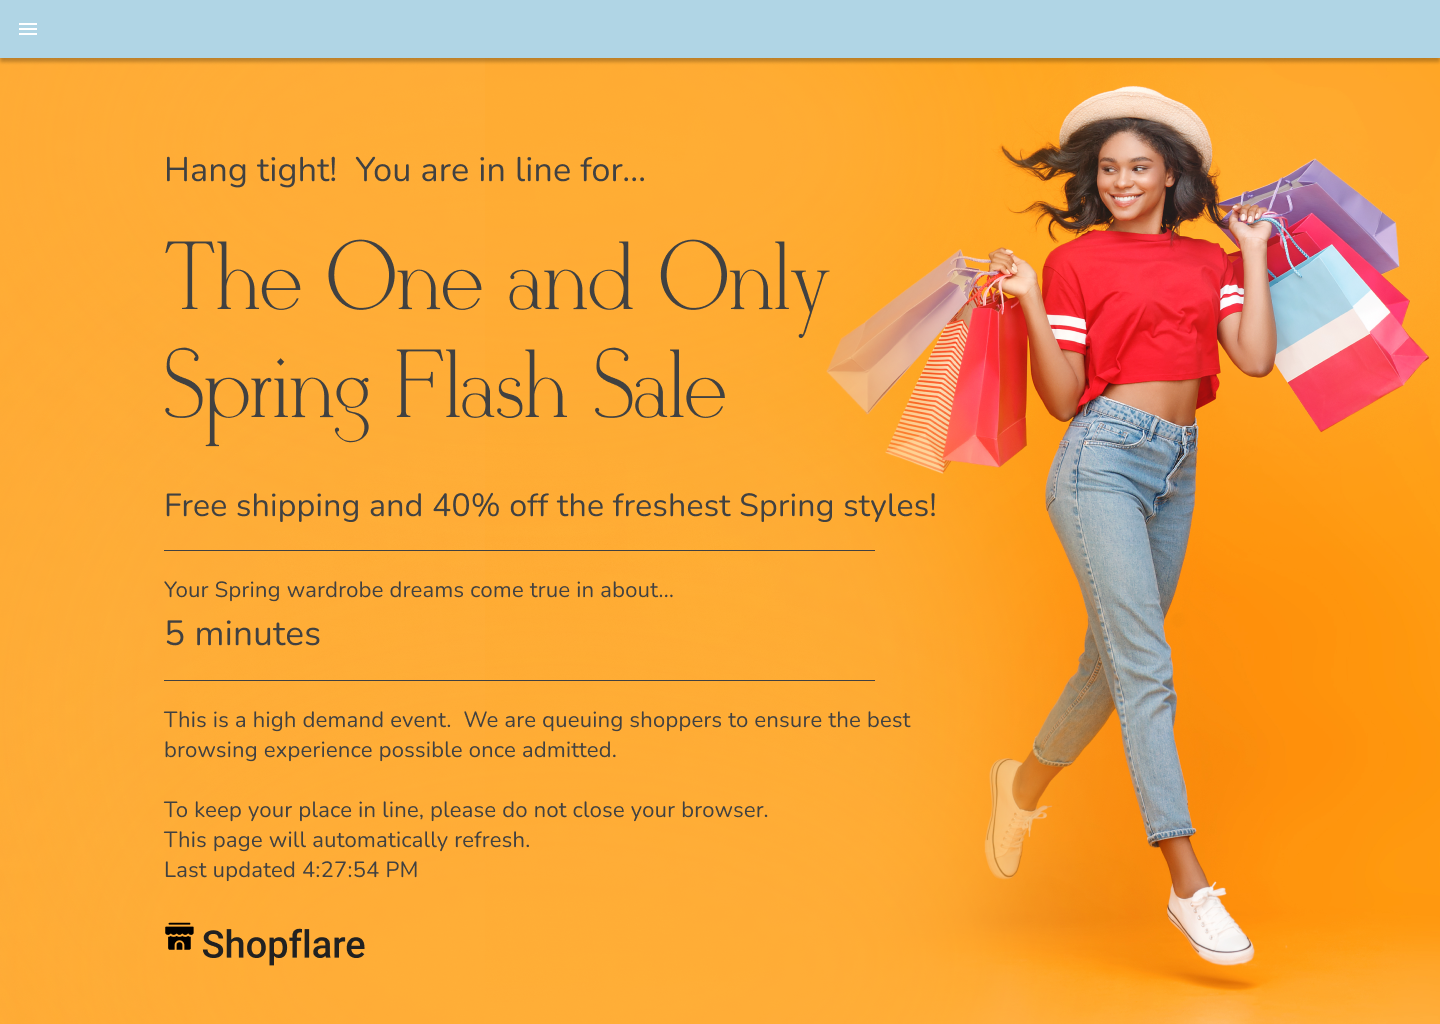 Shopflare’s overflow queuing page is also customized for the brand and the flash sale. Shoppers are assured they are in the right place, given an estimated wait time, and an explanation for queuing.